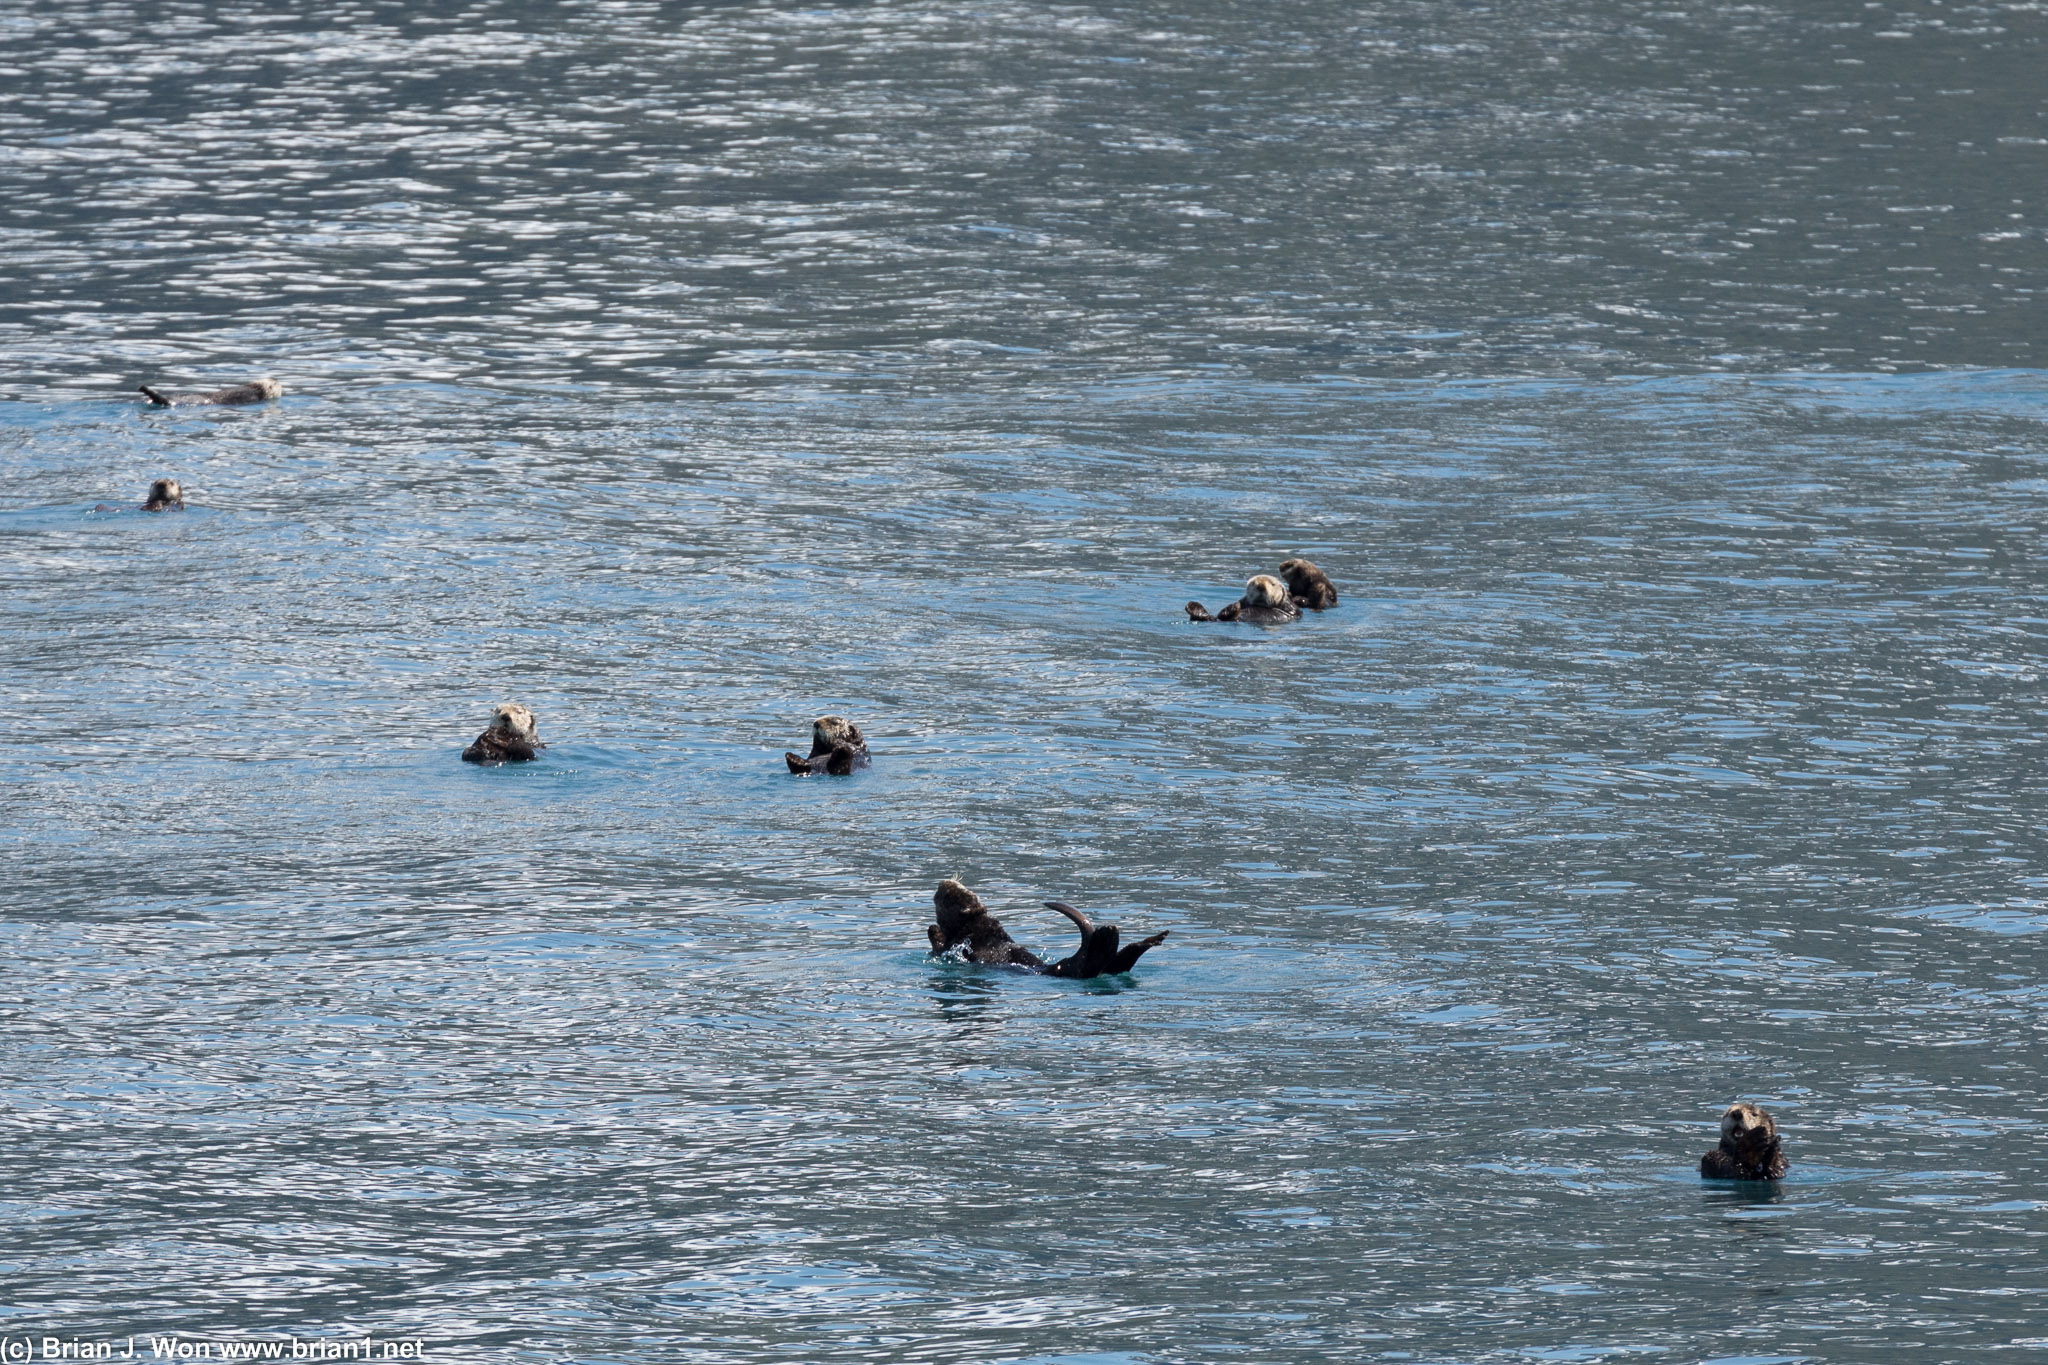 The otter in the center is clearly enjoying himself/herself.